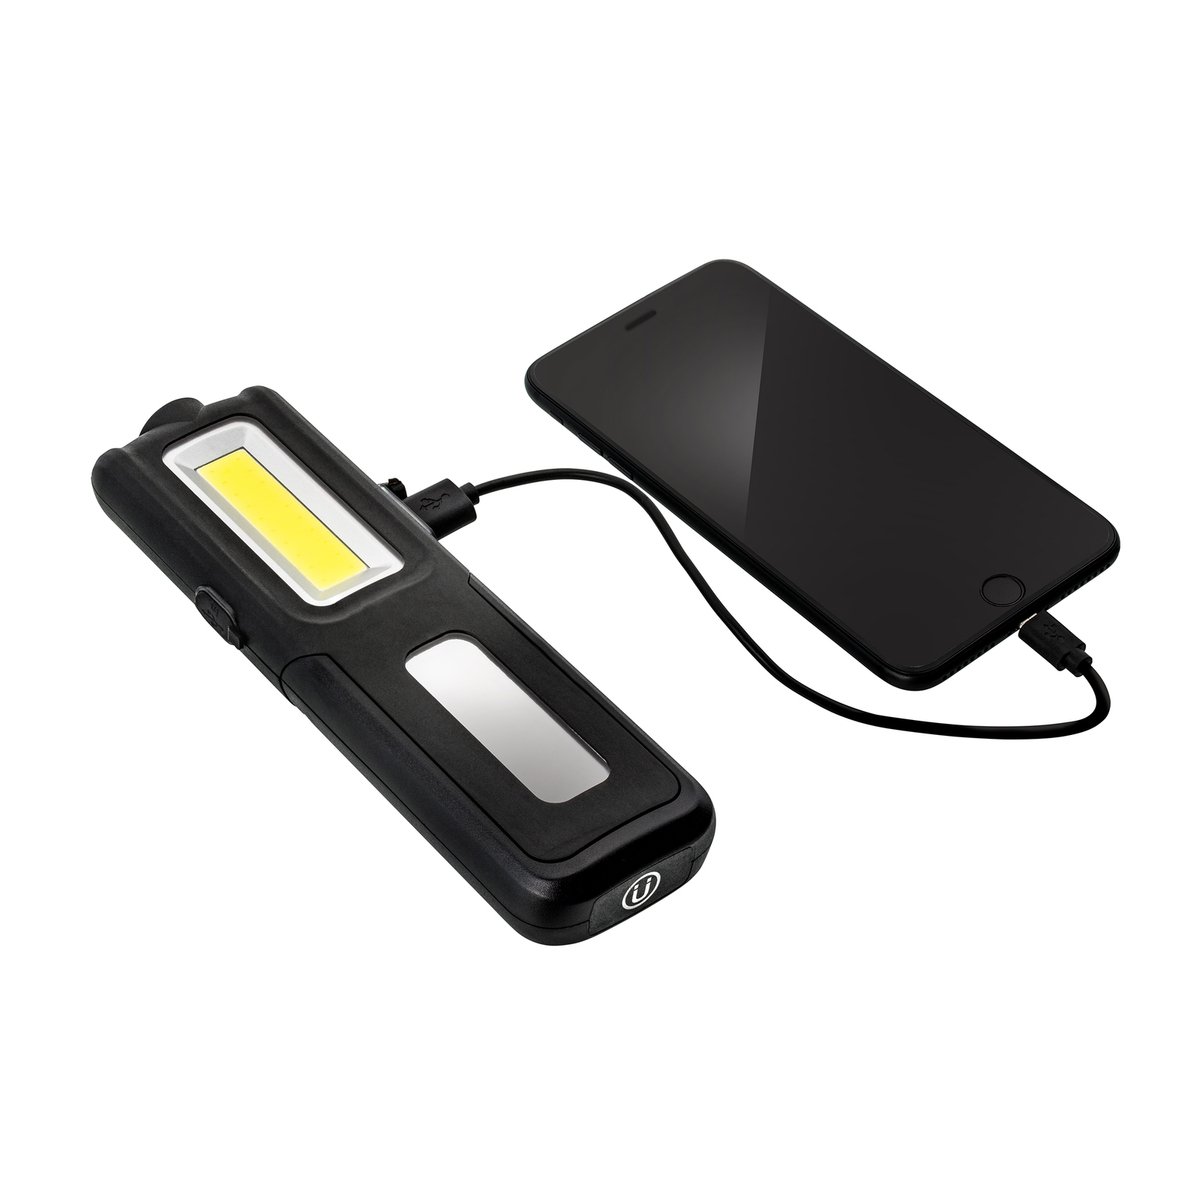 Multifunctional Torch with Powerbank REEVES-DELFT black 2000 mAh